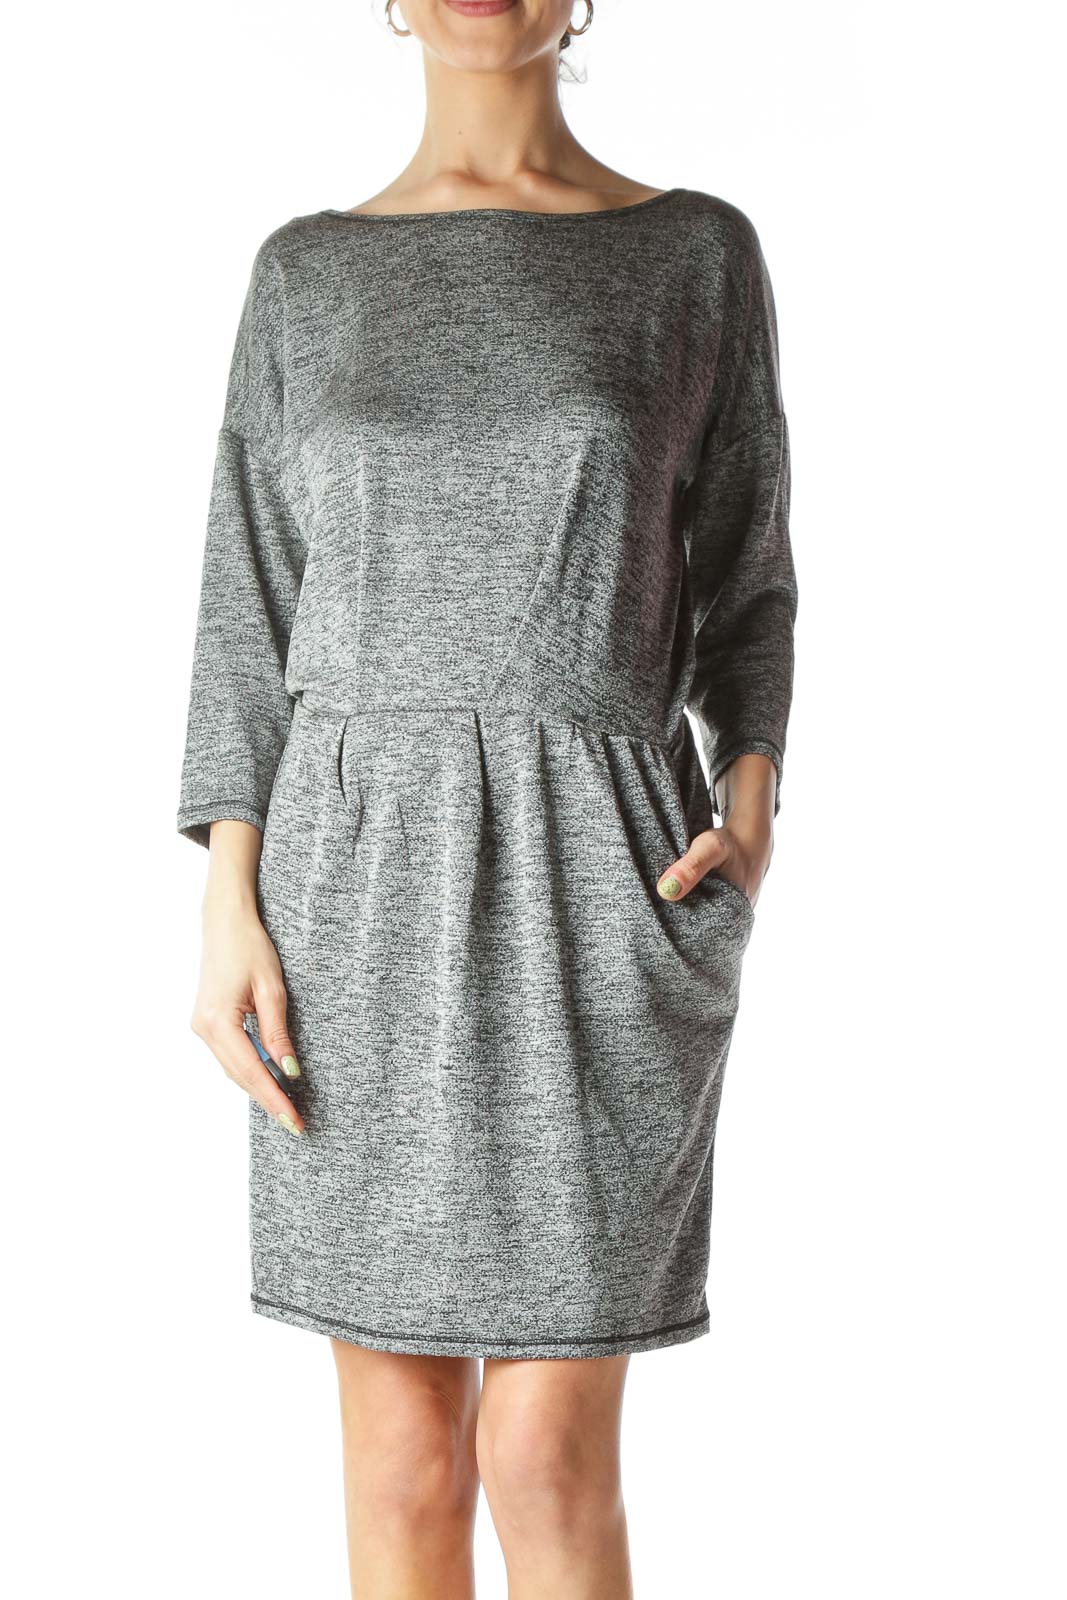 Gray Textured Stretch Pocketed Work Dress Front